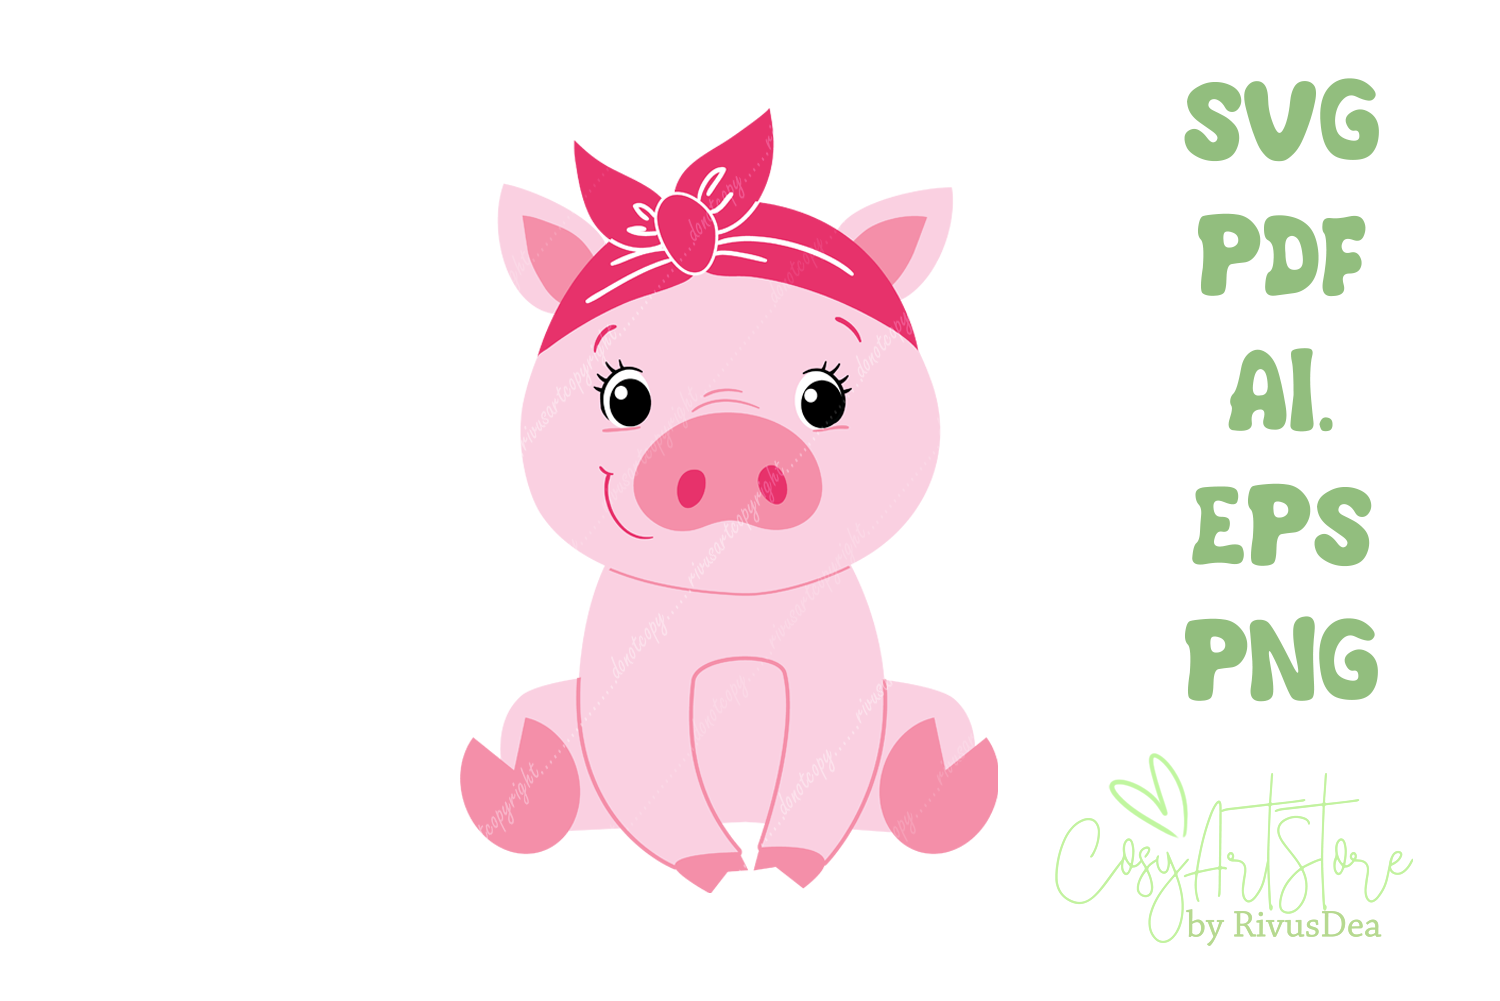 Cute Bandana Pig SVG file download. Baby piggy in red scarf. By